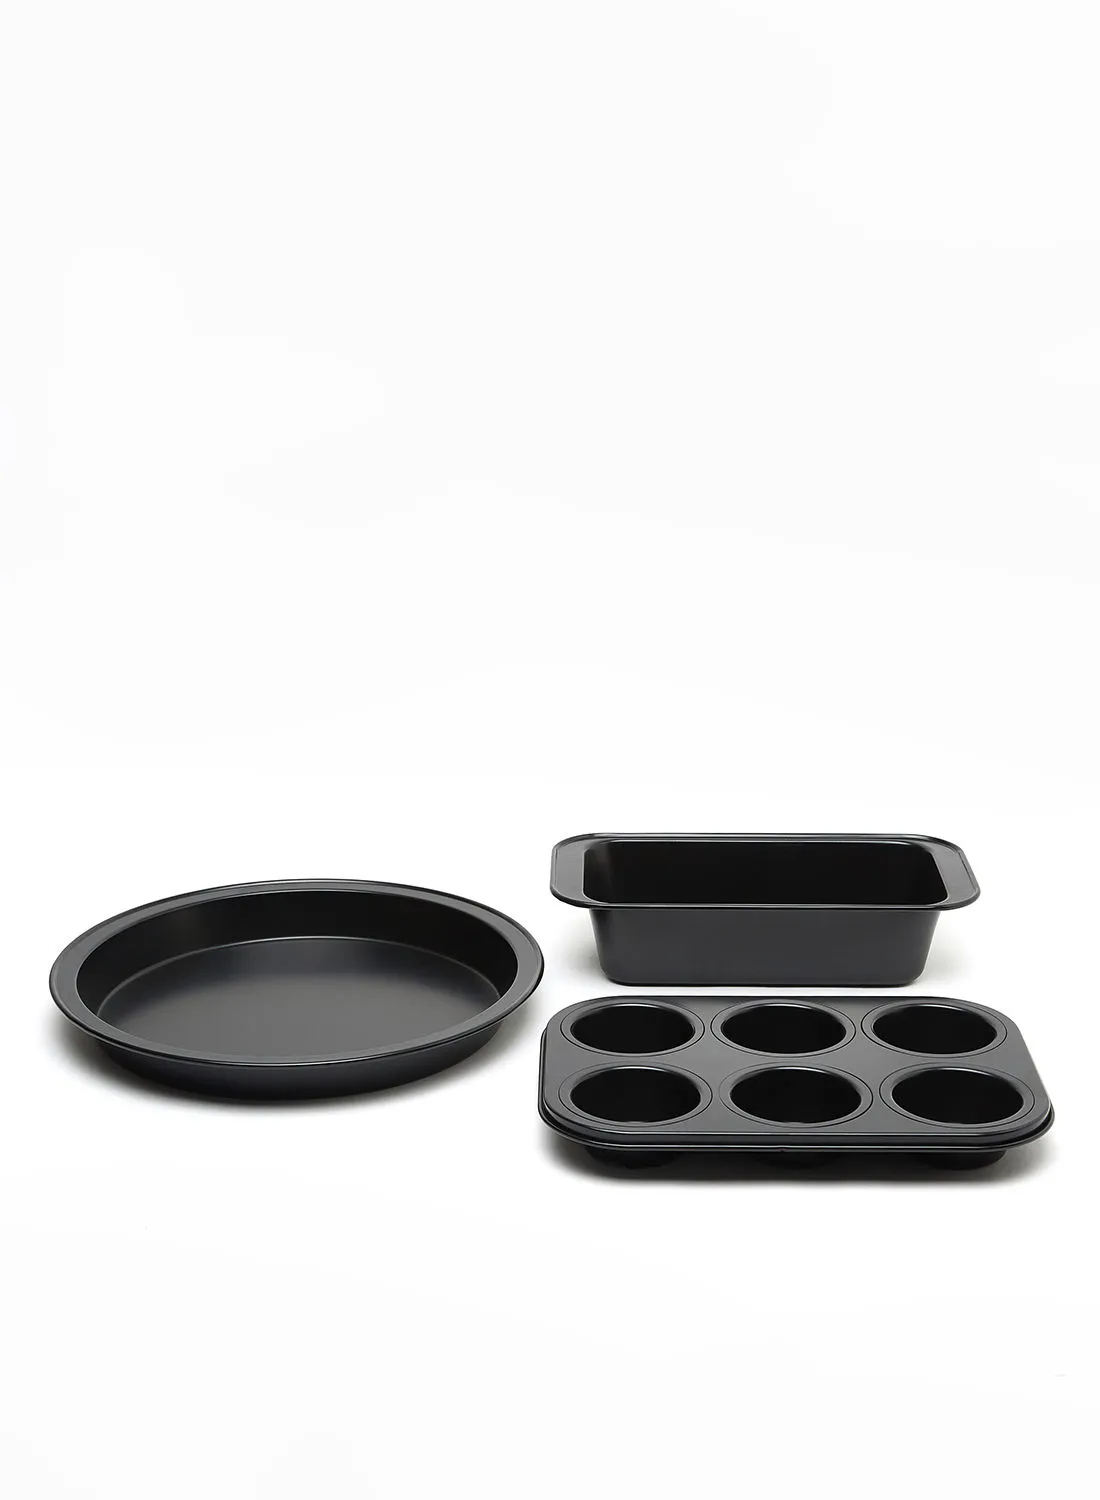 noon east 3 Piece Oven Pan Set - Made Of Carbon Steel - Baking Pan - Oven Trays - Cake Tray - Oven Pan - Cake Mold - Black